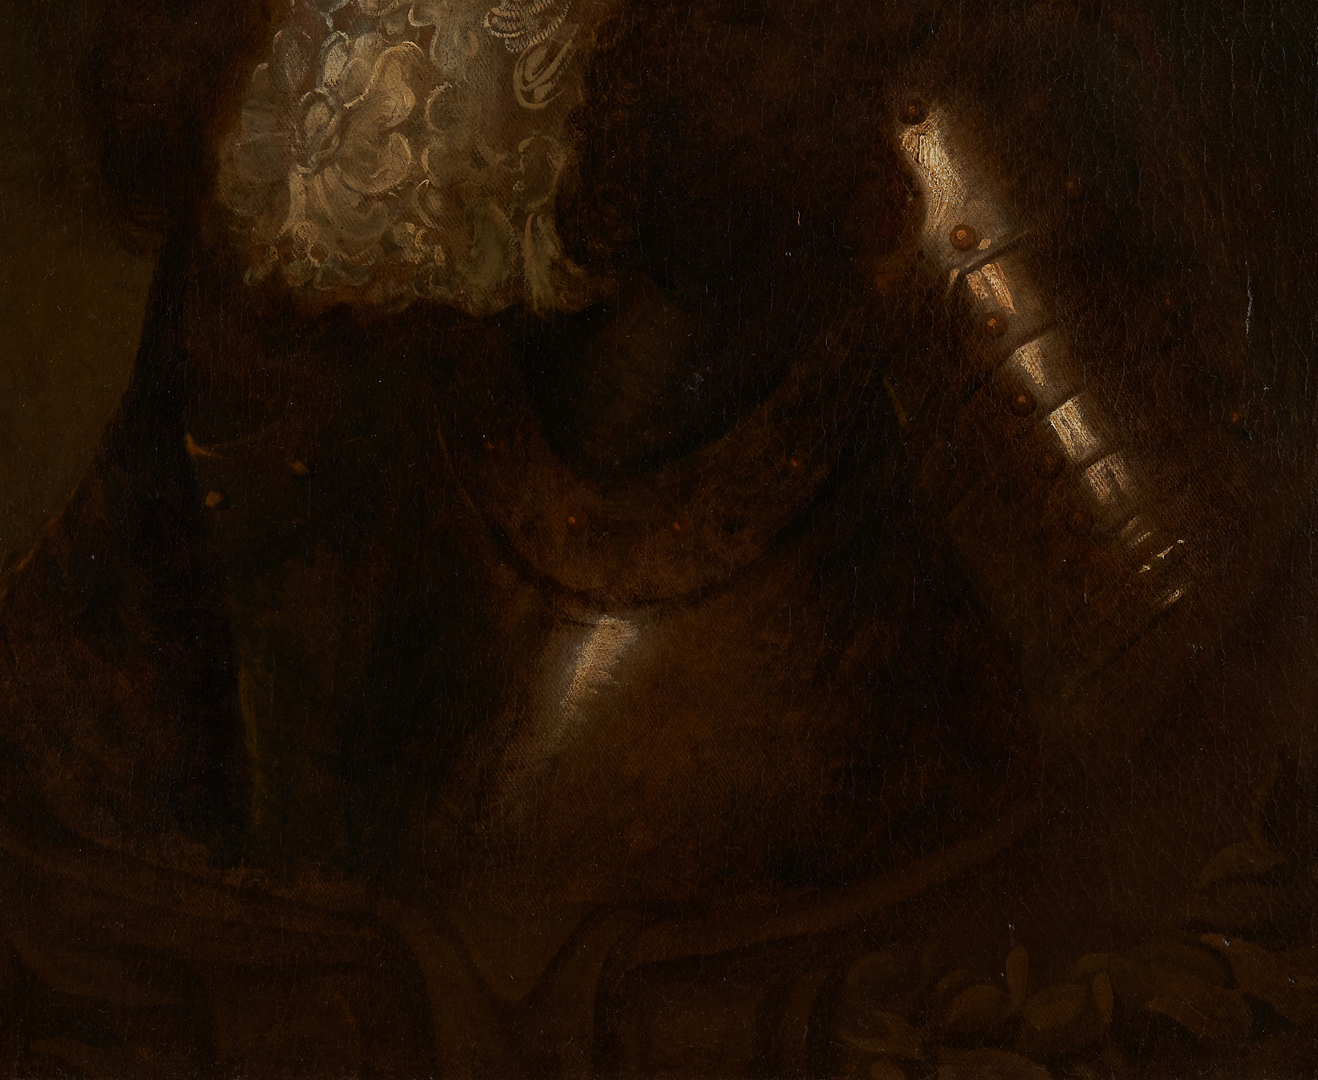 Lot 109: Portrait of Young Man in Armor